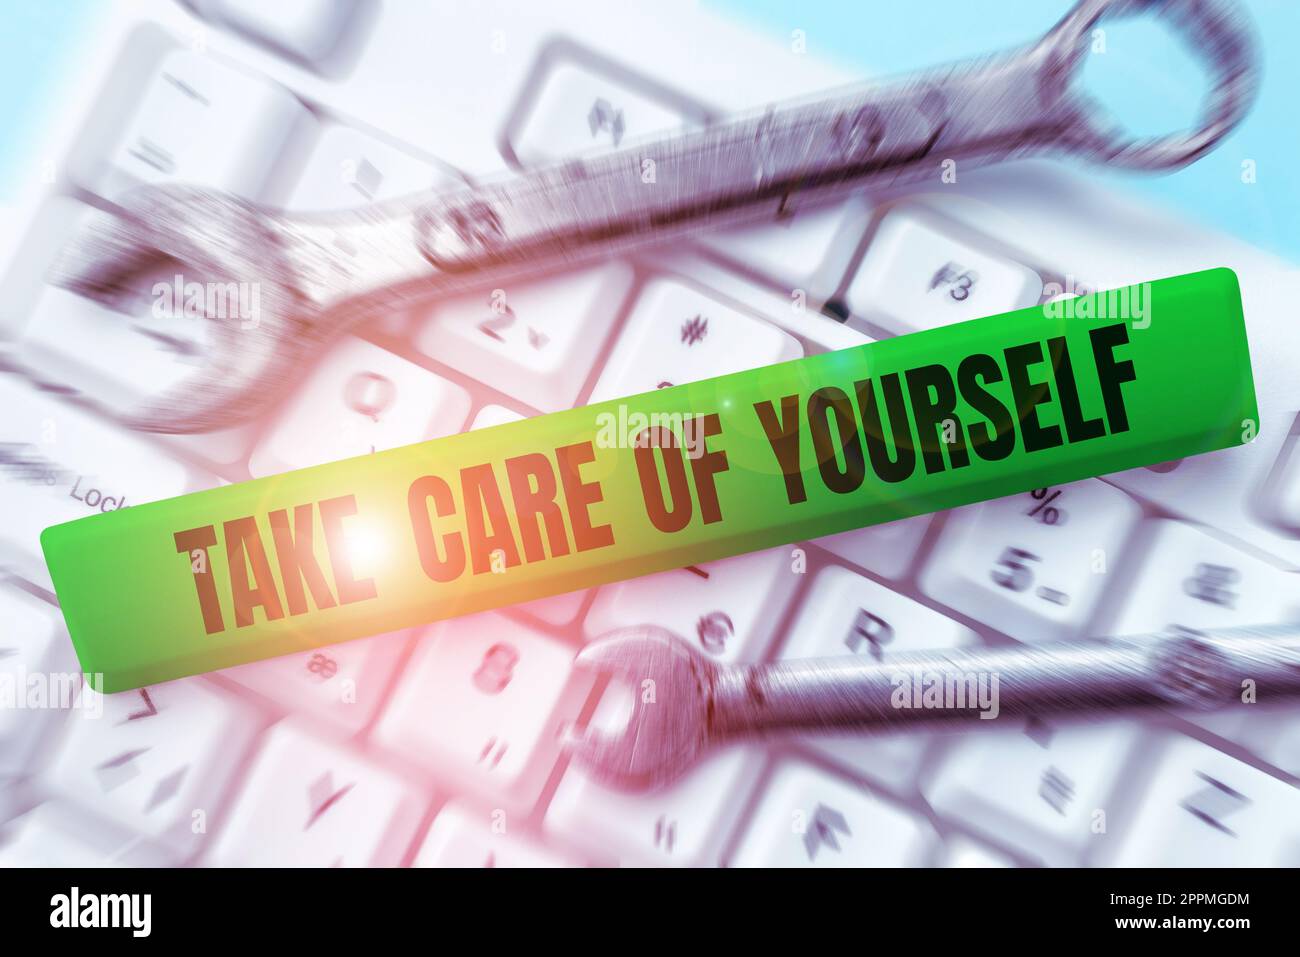 Text sign showing Take Care Of Yourself. Word Written on a polite way of ending a get-together or conversation Stock Photo